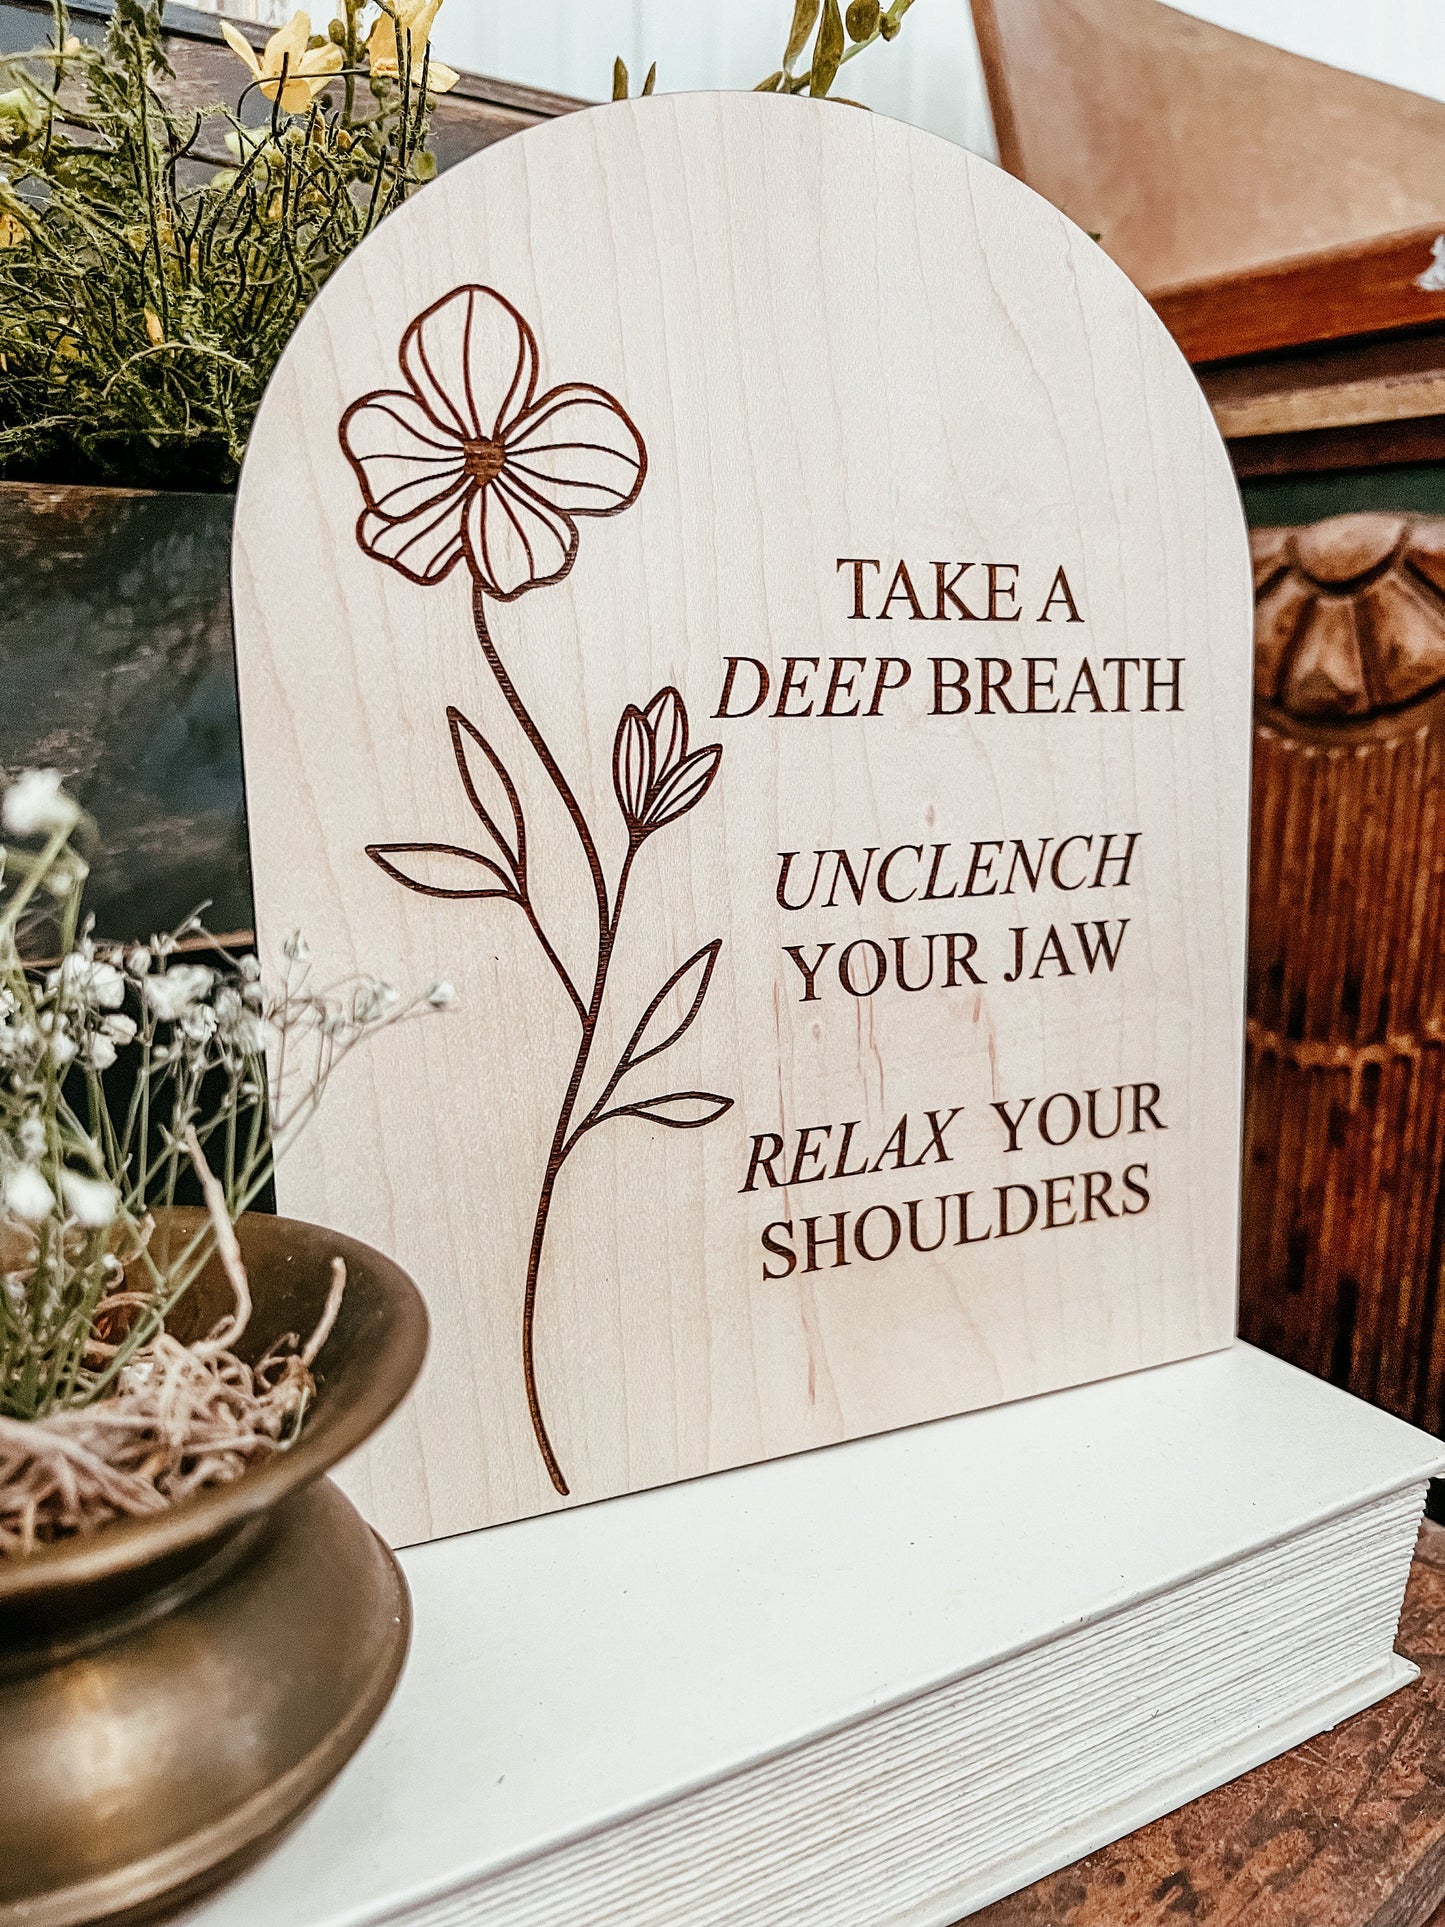 Take A Deep Breath Unclench Your Jaw Relax Your Shoulders | Therapy Office Decor | Positive Wall Art | Boho | Handmade | Boho Arched Signs